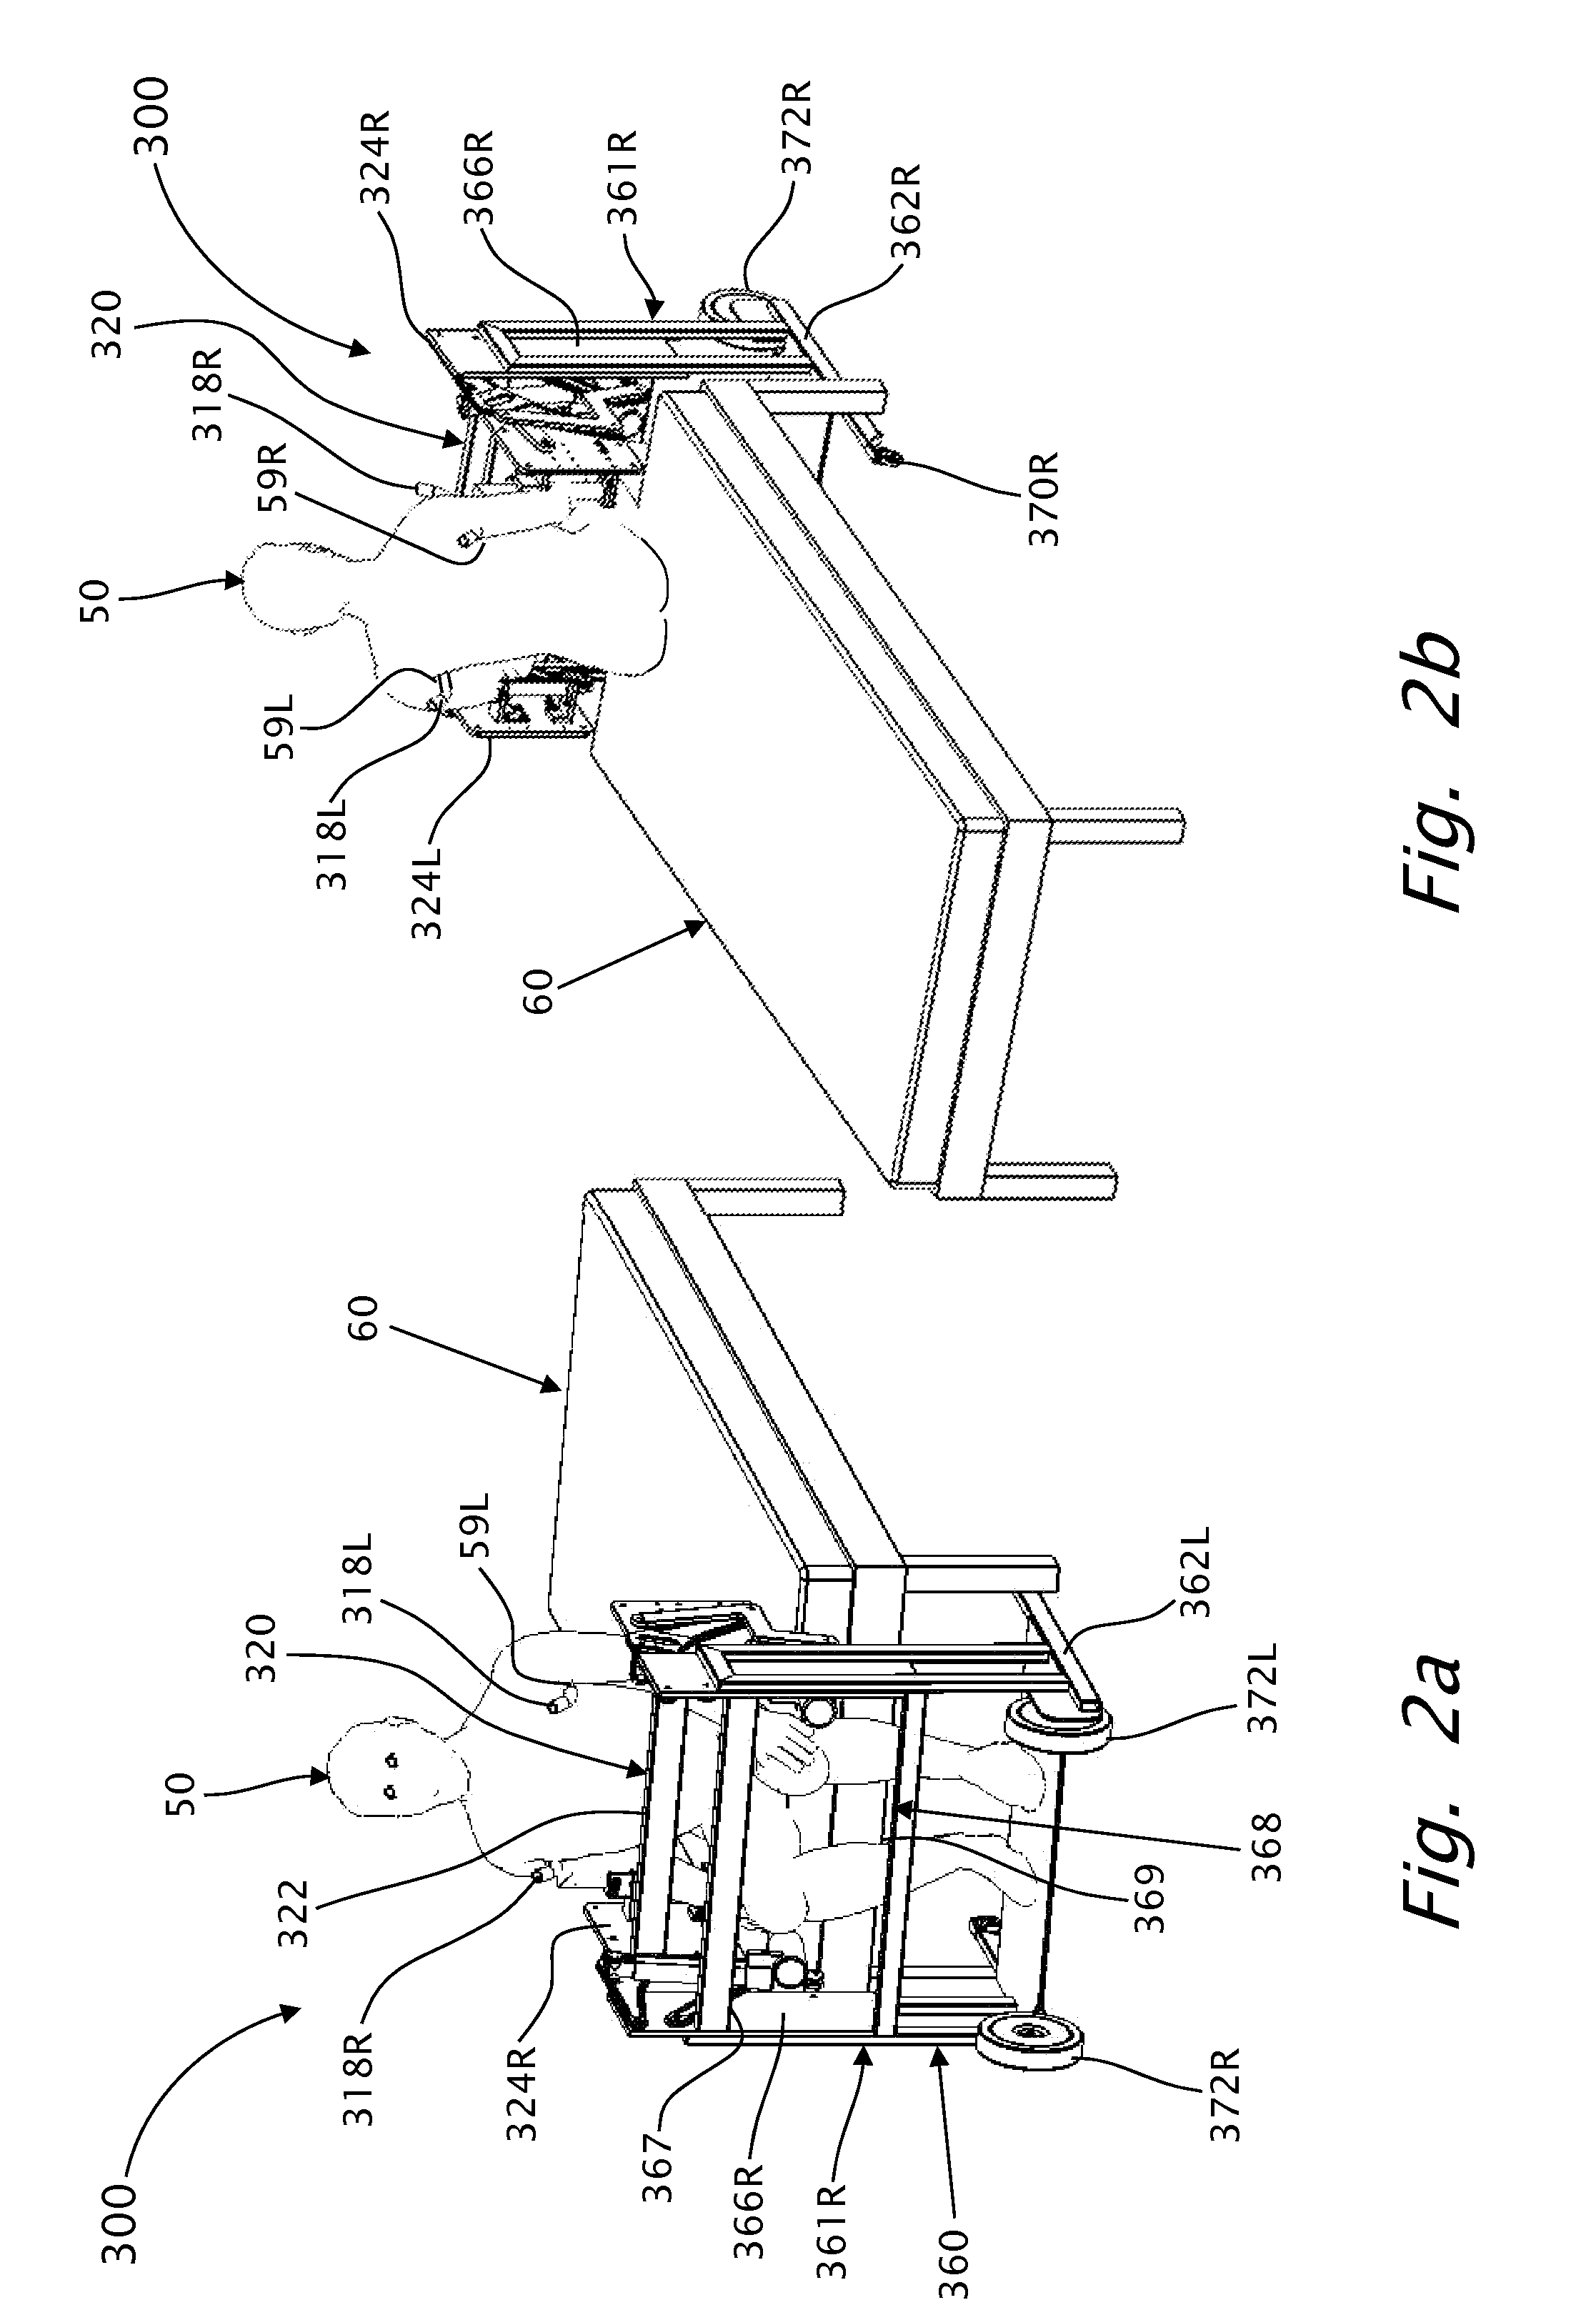 Ergonomic lifting and lowering mechanism for apparatuses for assisting a handicapped person